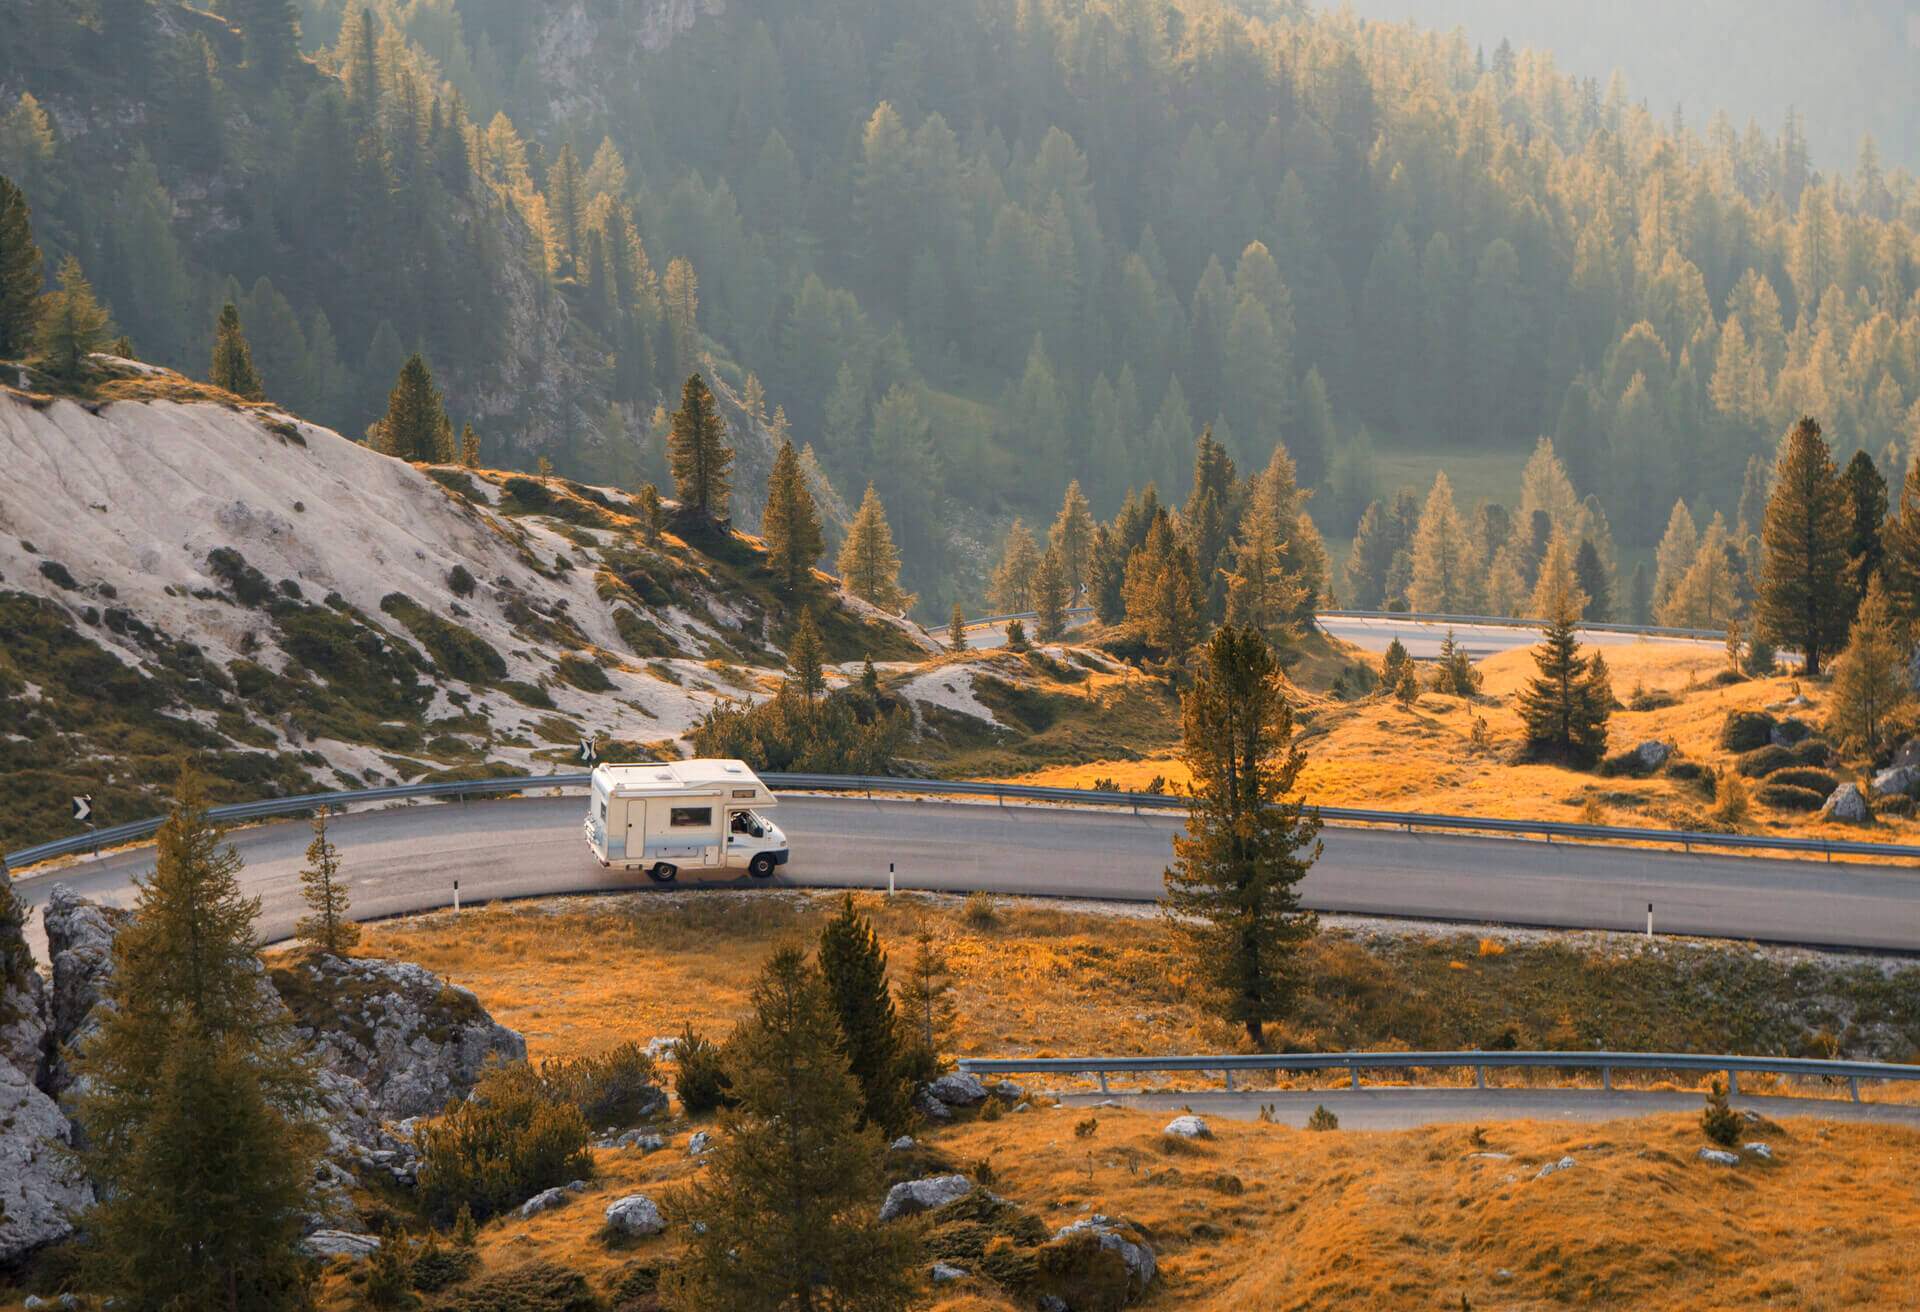 dest_italy_theme_mountains_outdoors_camper_van_caravan_transportation_travel_vacation_road-gettyimages-975914094_universal_within-usage-period_78100-2